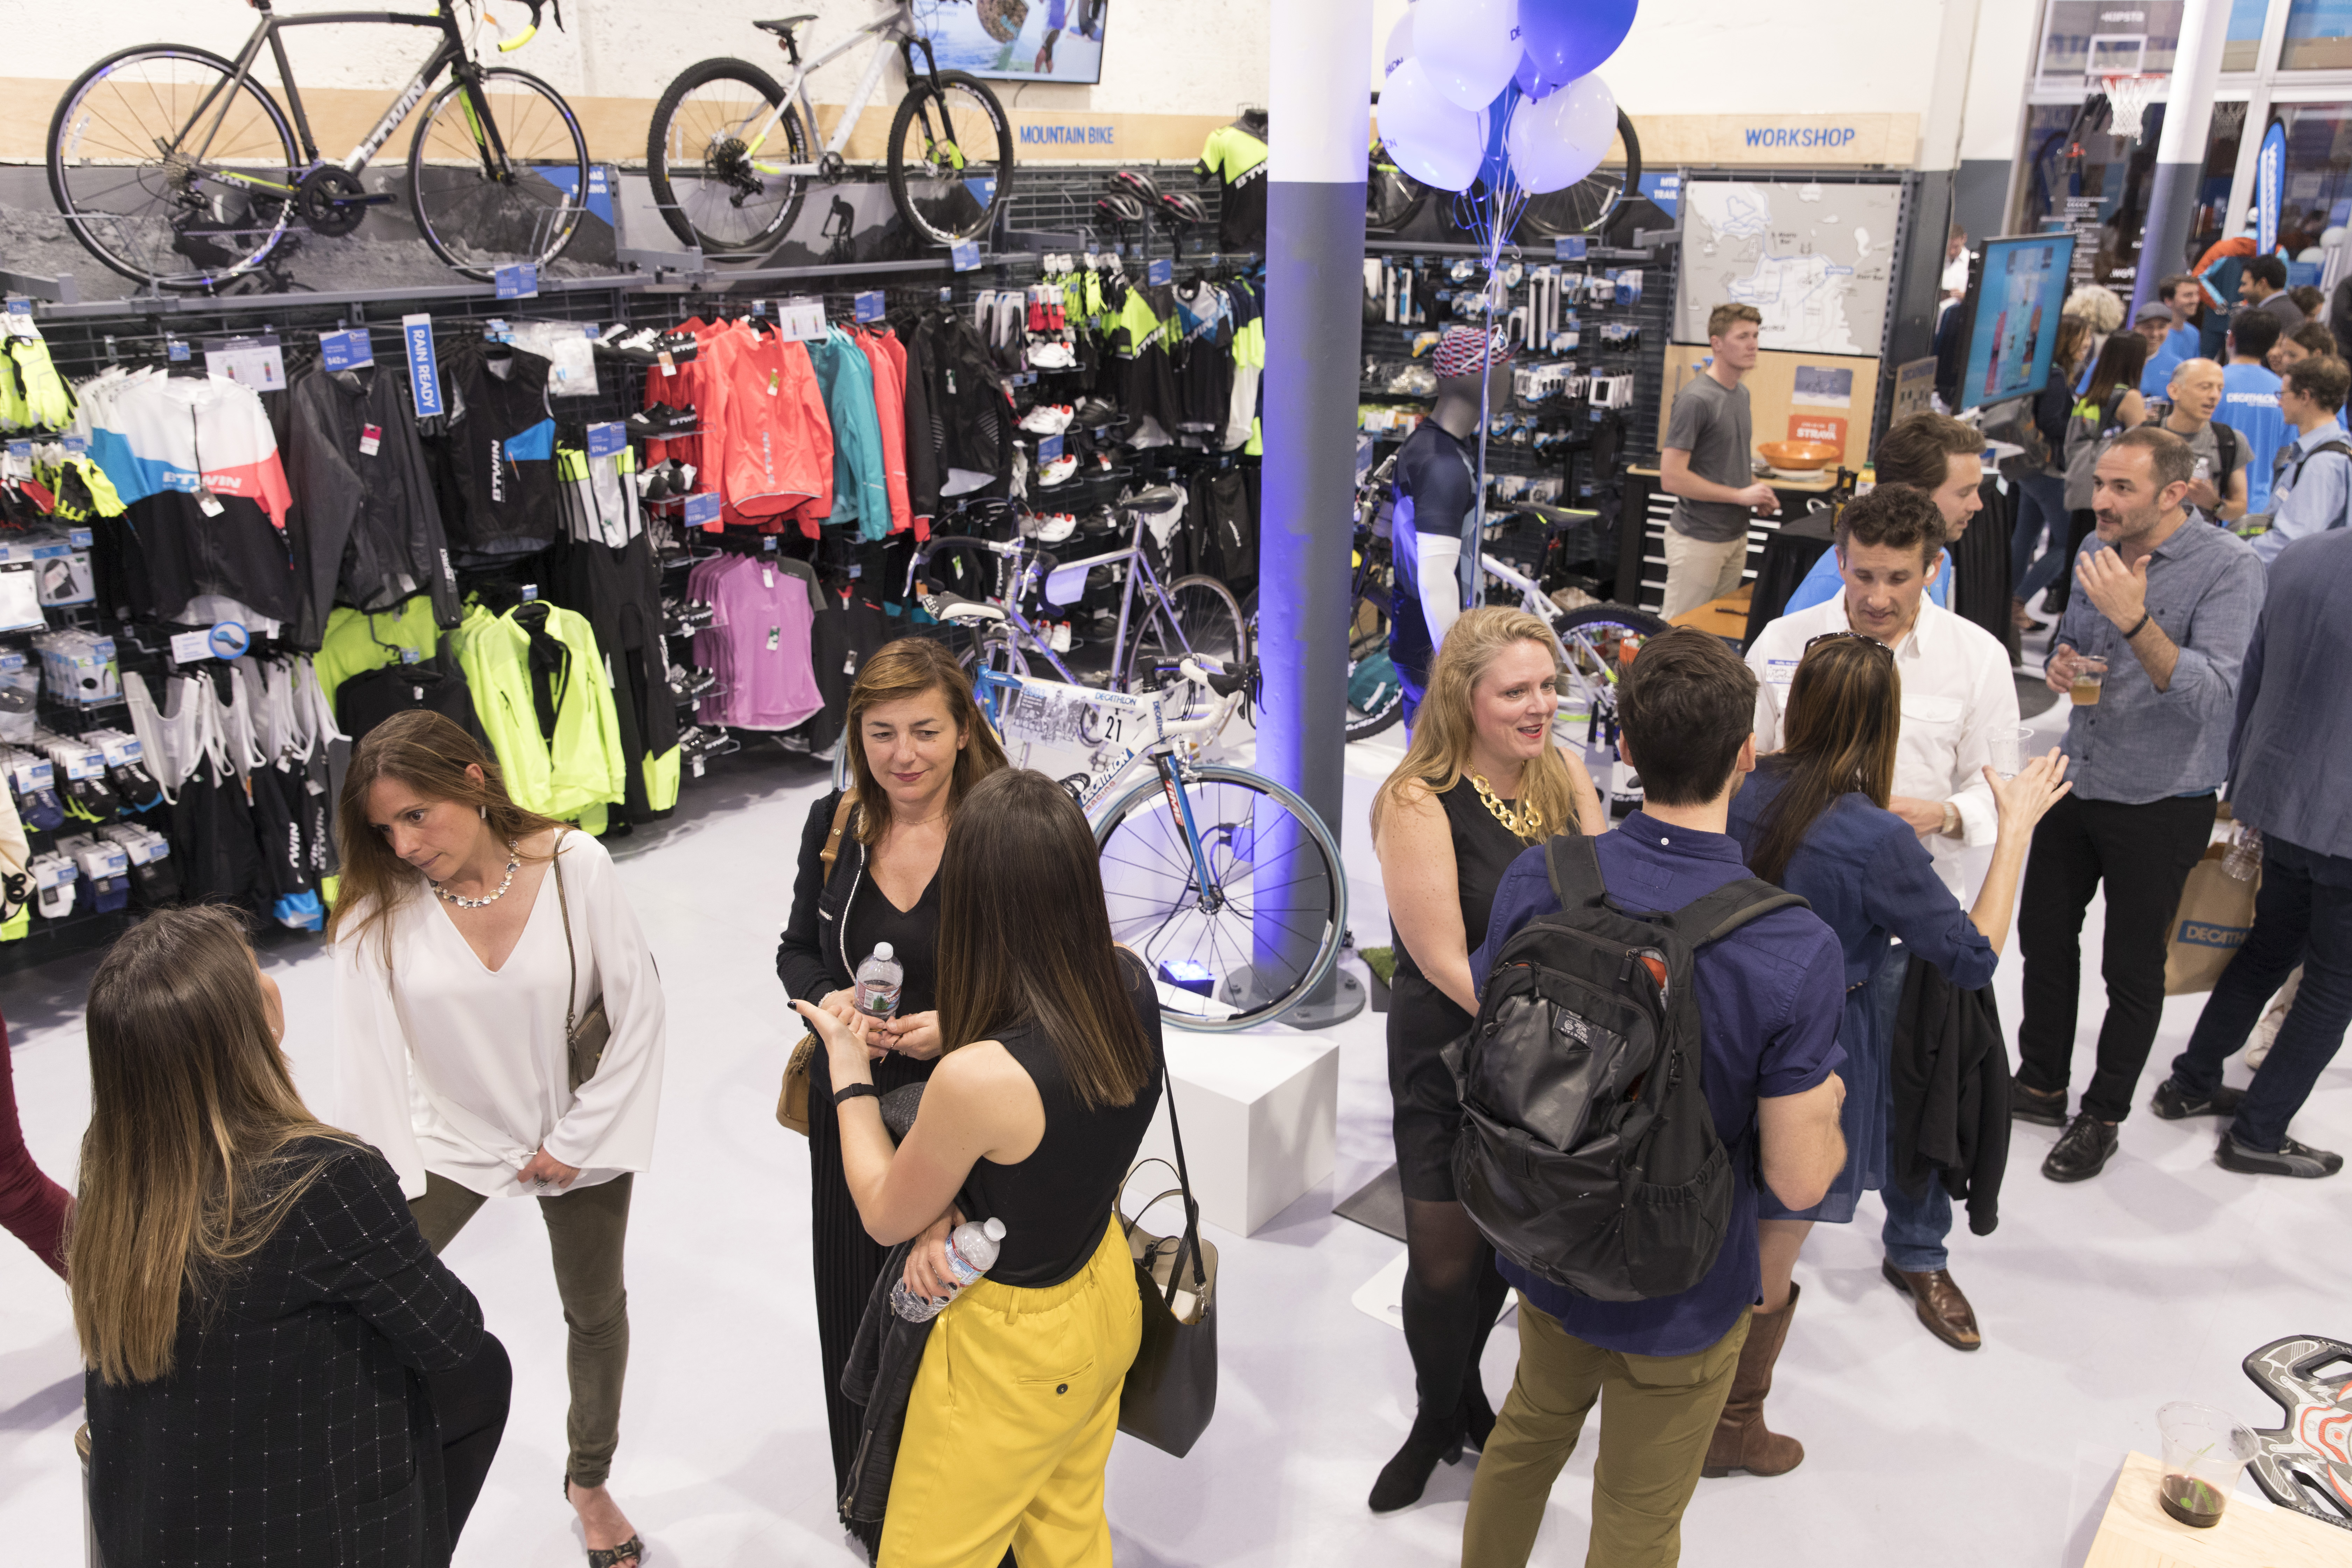 Decathlon makes its return to the US